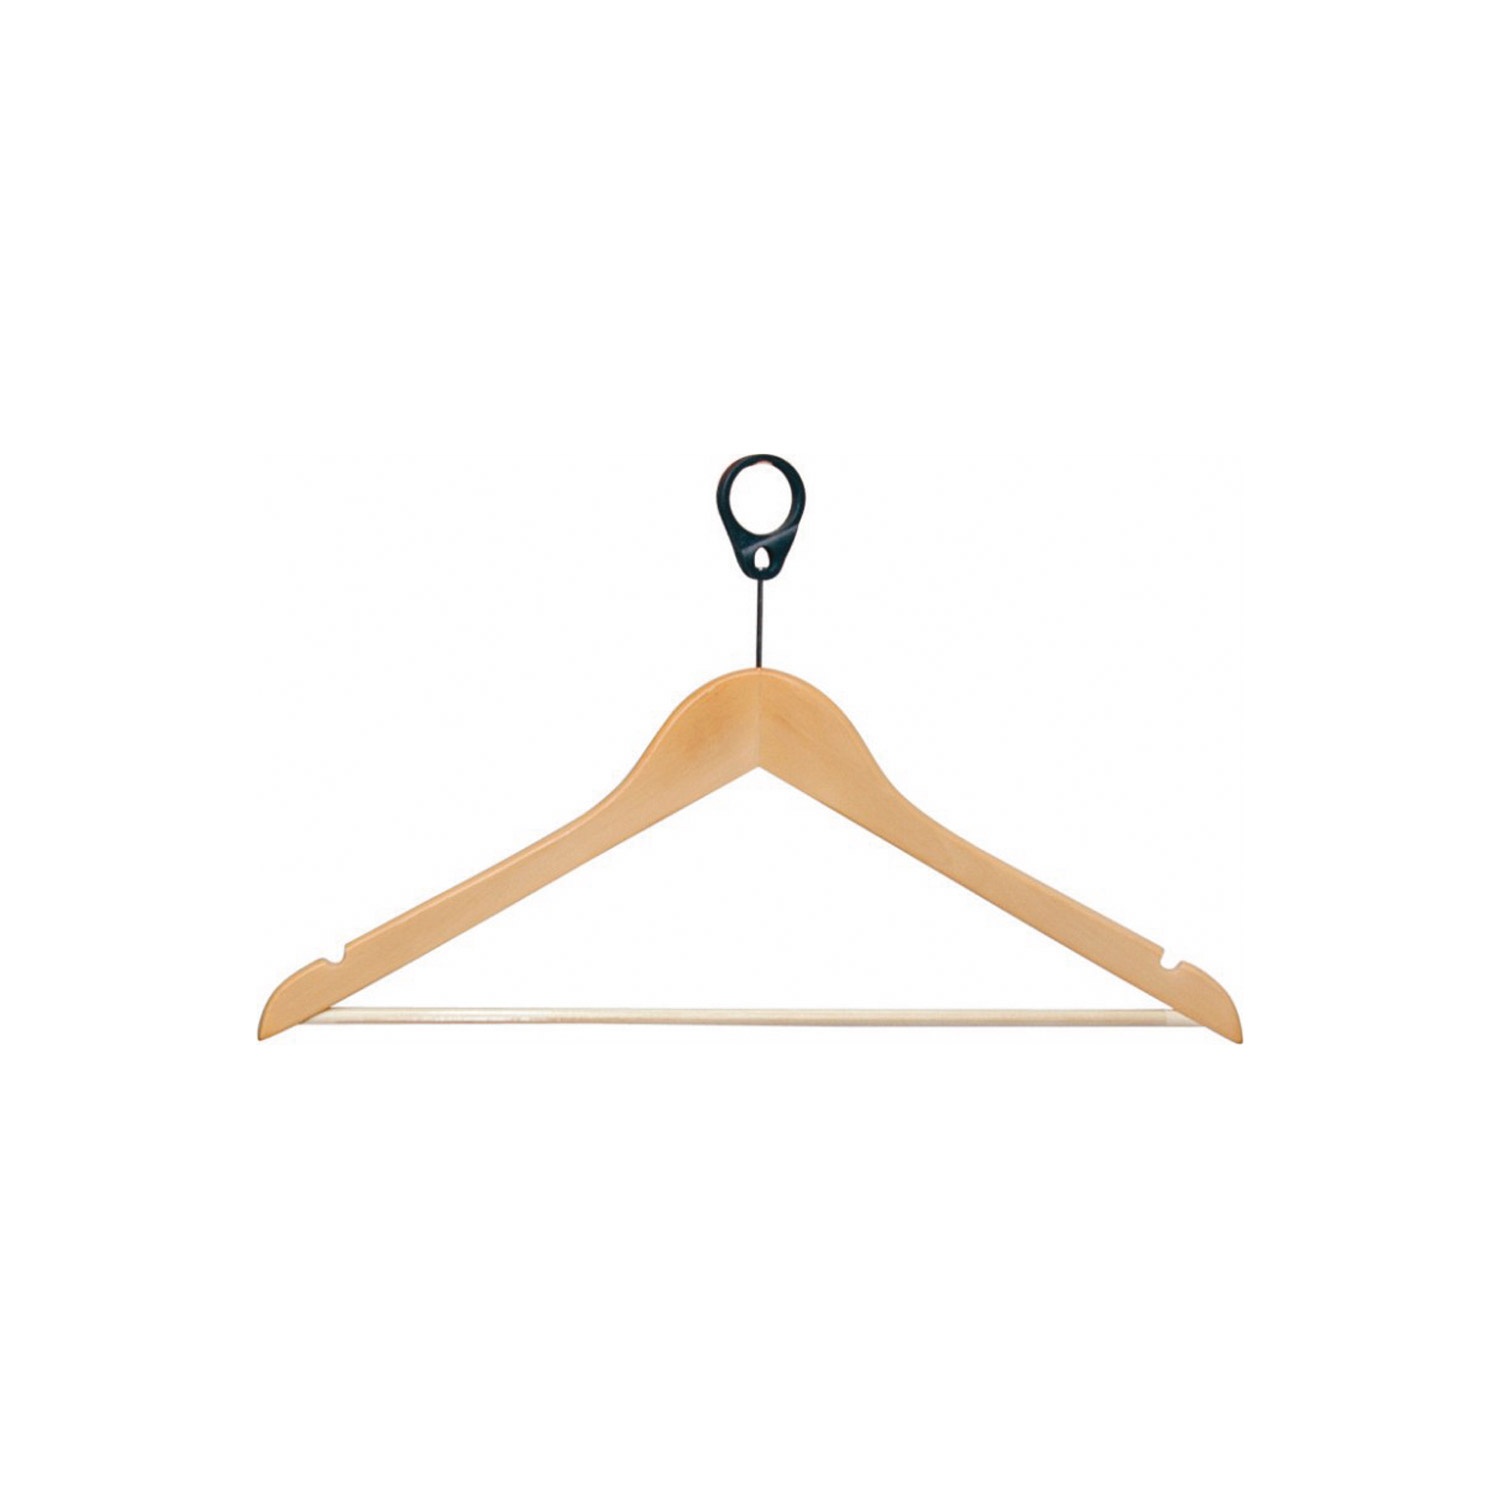 PL Printed Wooden Clothes Hanger